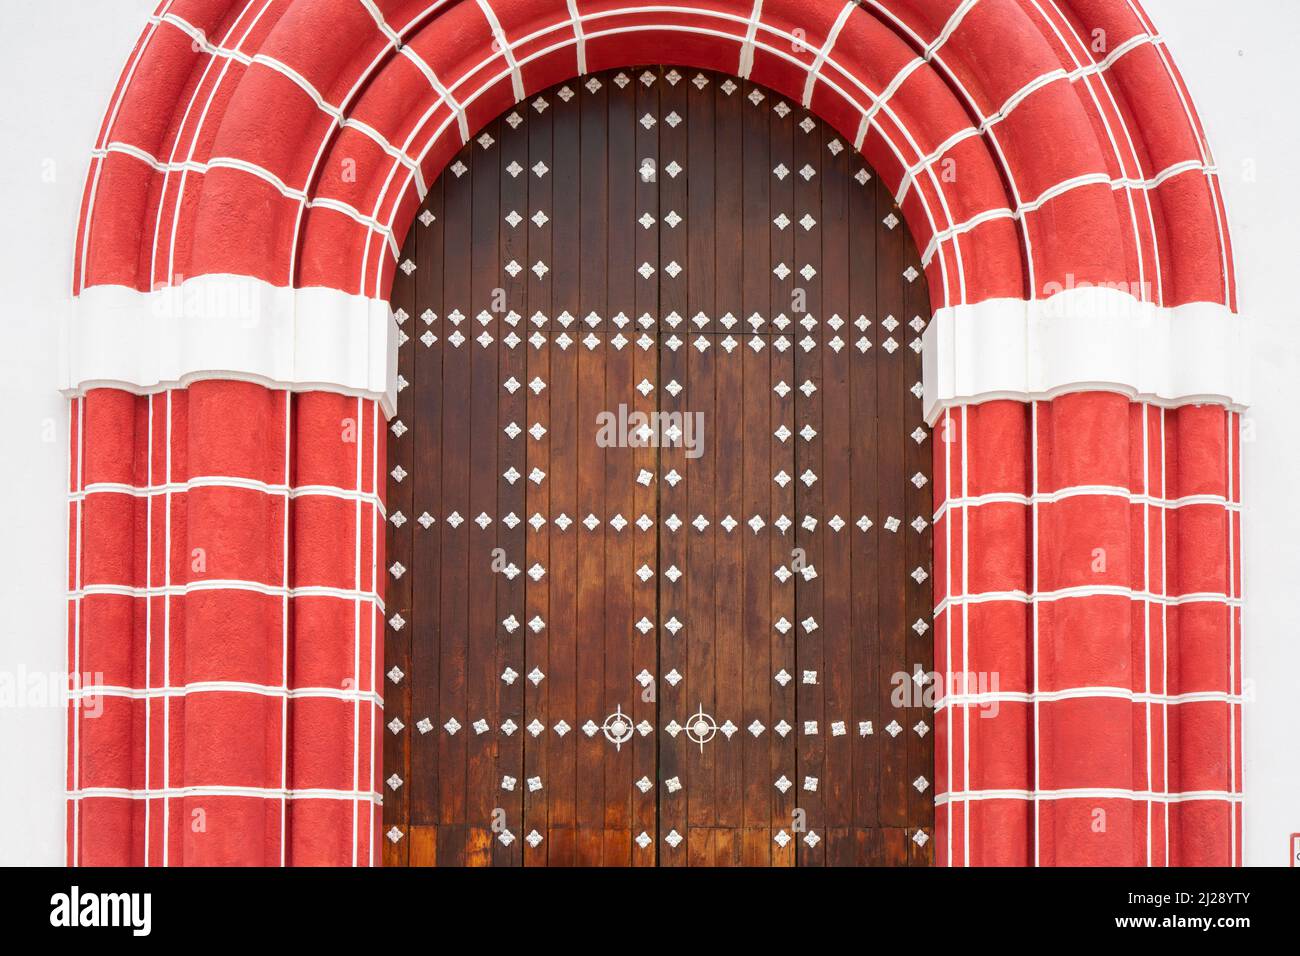 Arched wooden door with decorated white elements. Red style gate frame Stock Photo